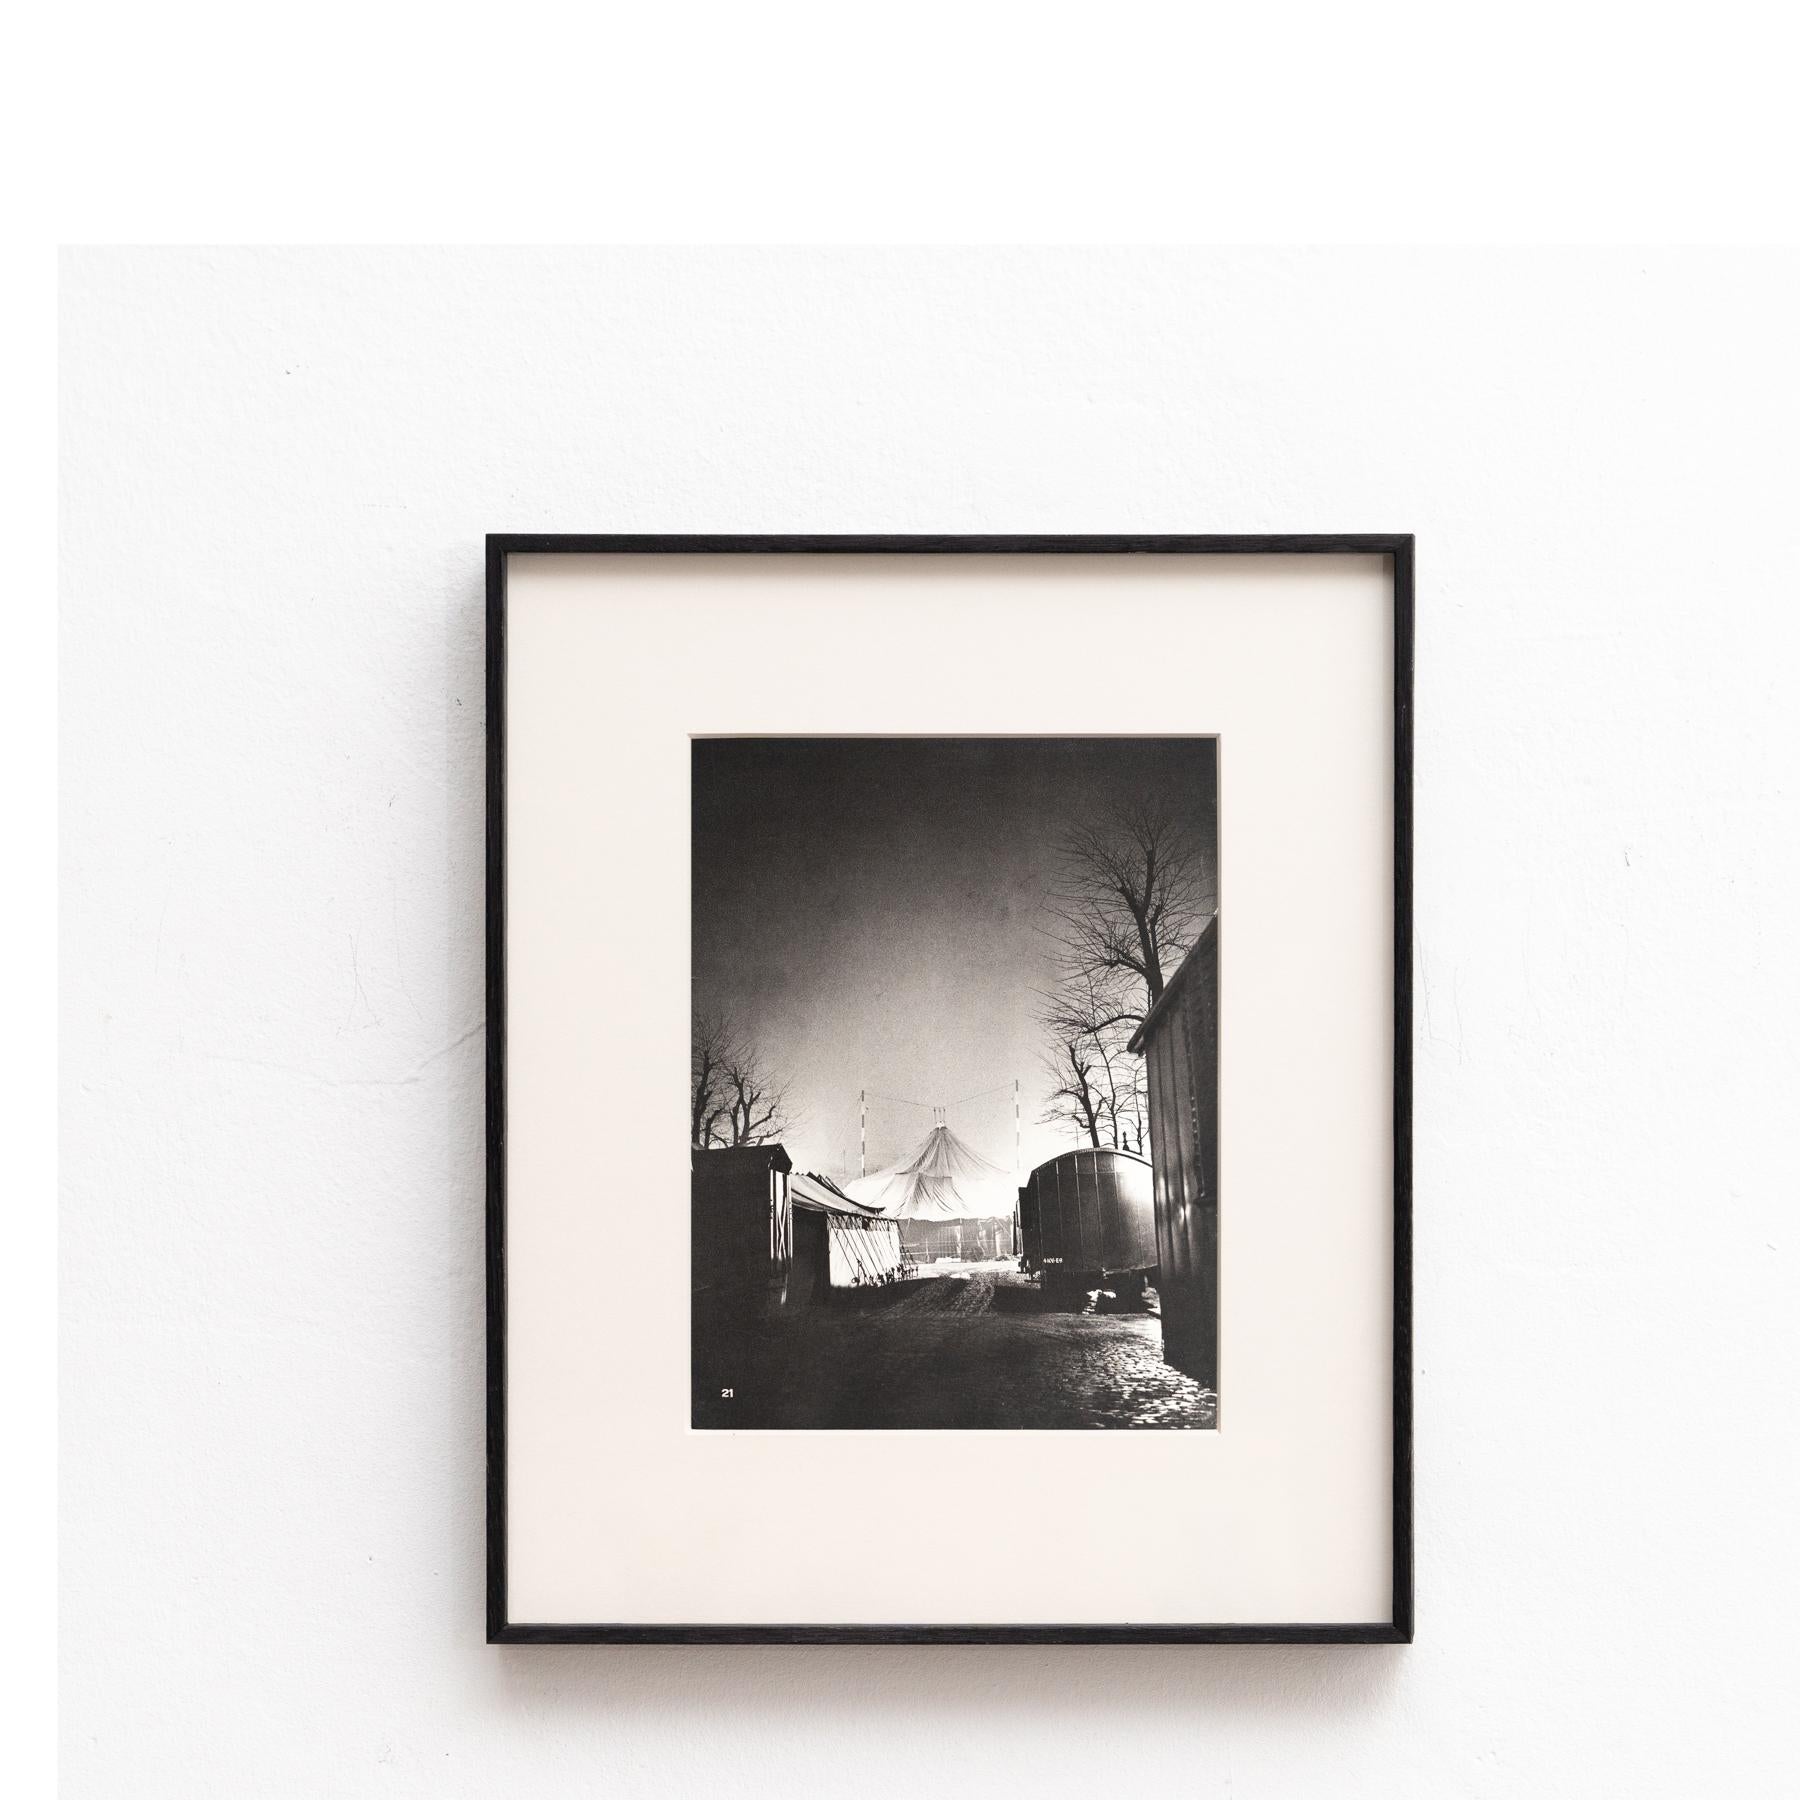 French Brassai Rare Black And White Framed Photography, circa 1930 For Sale